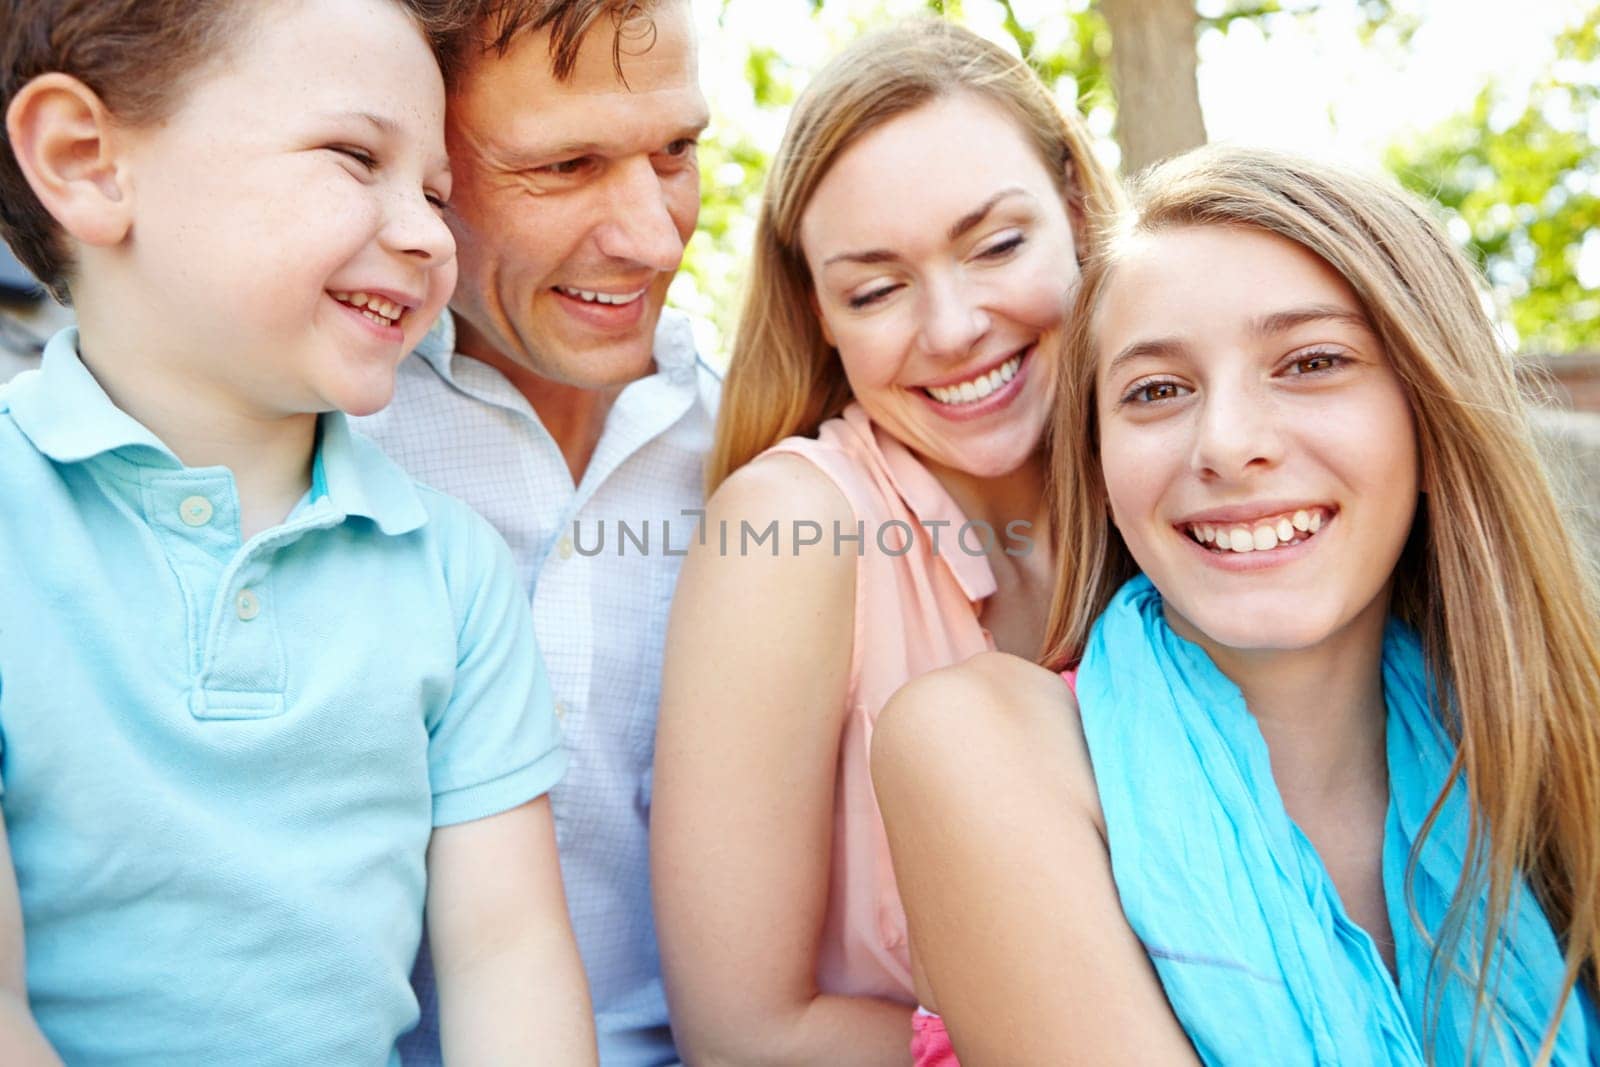 Spending time together in the park. Happy family smiling while outdoors